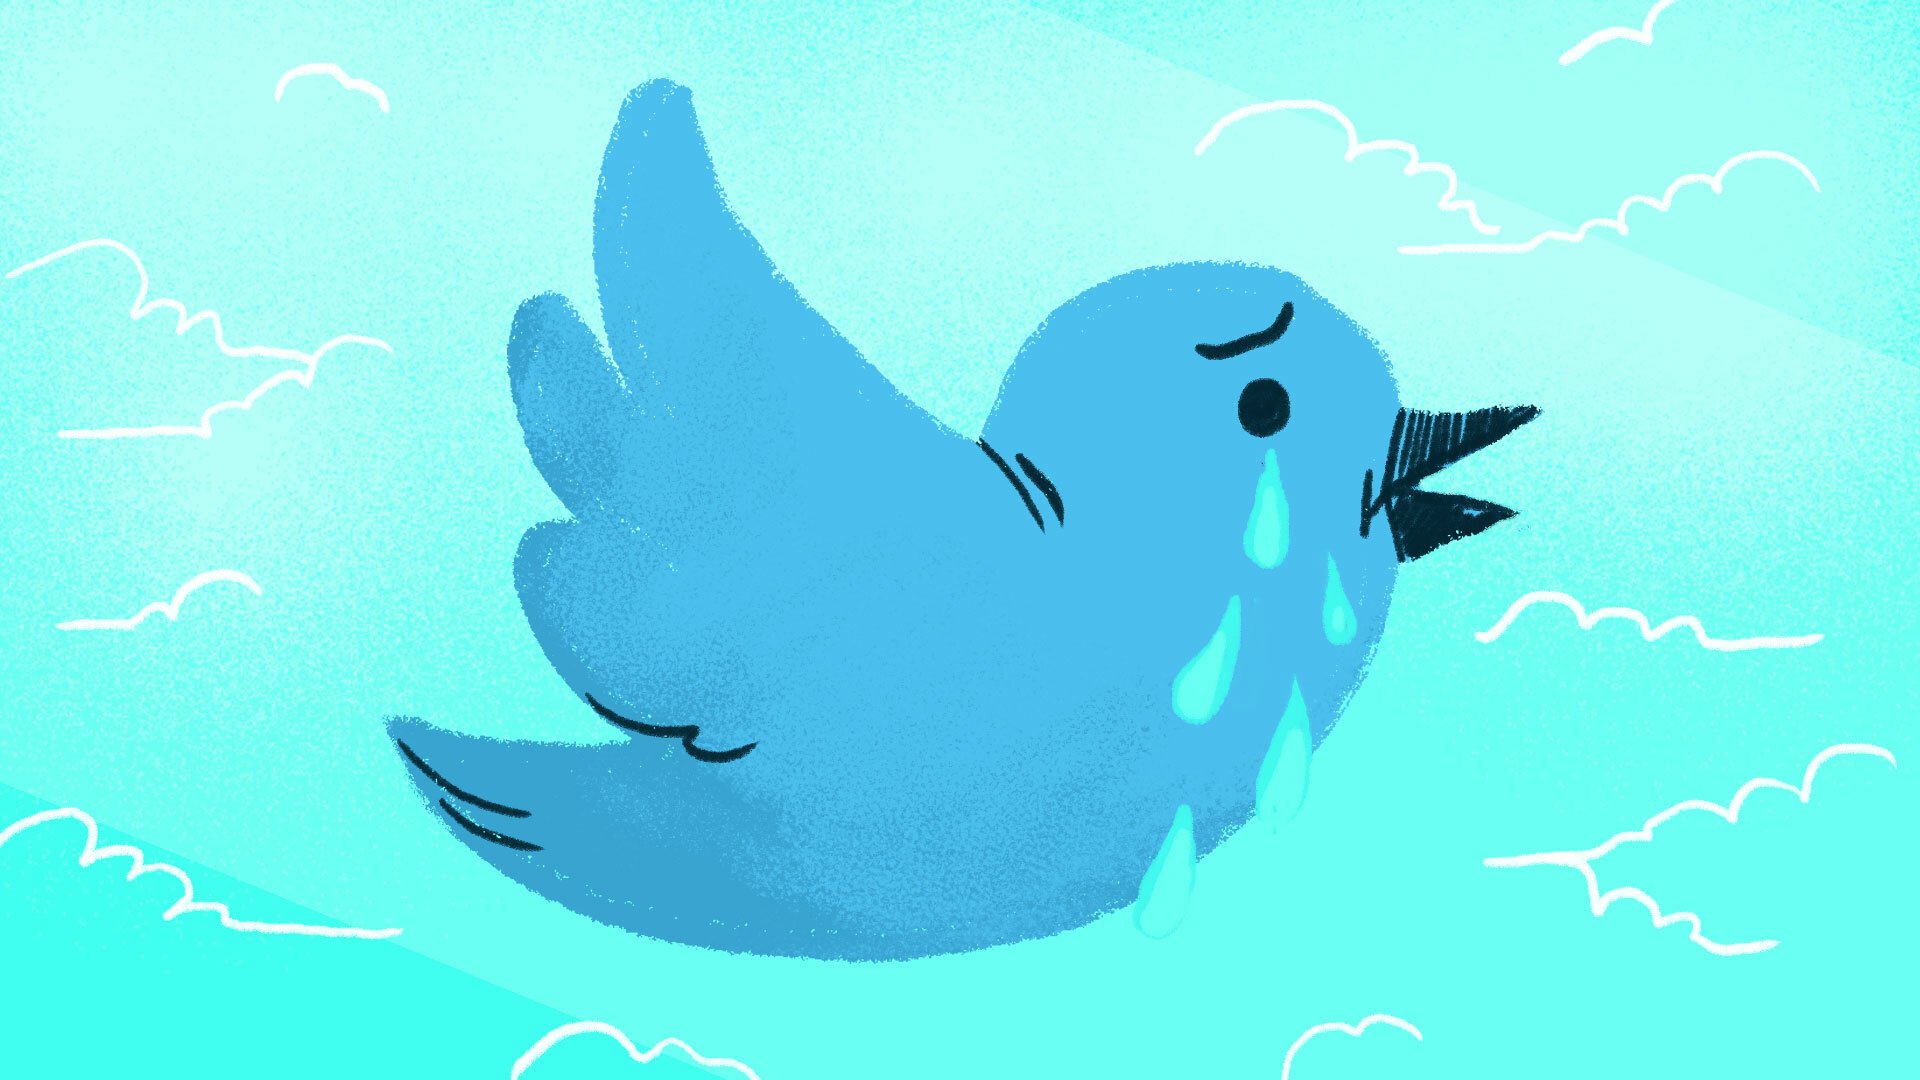 The Twitter bird sweating and crying.